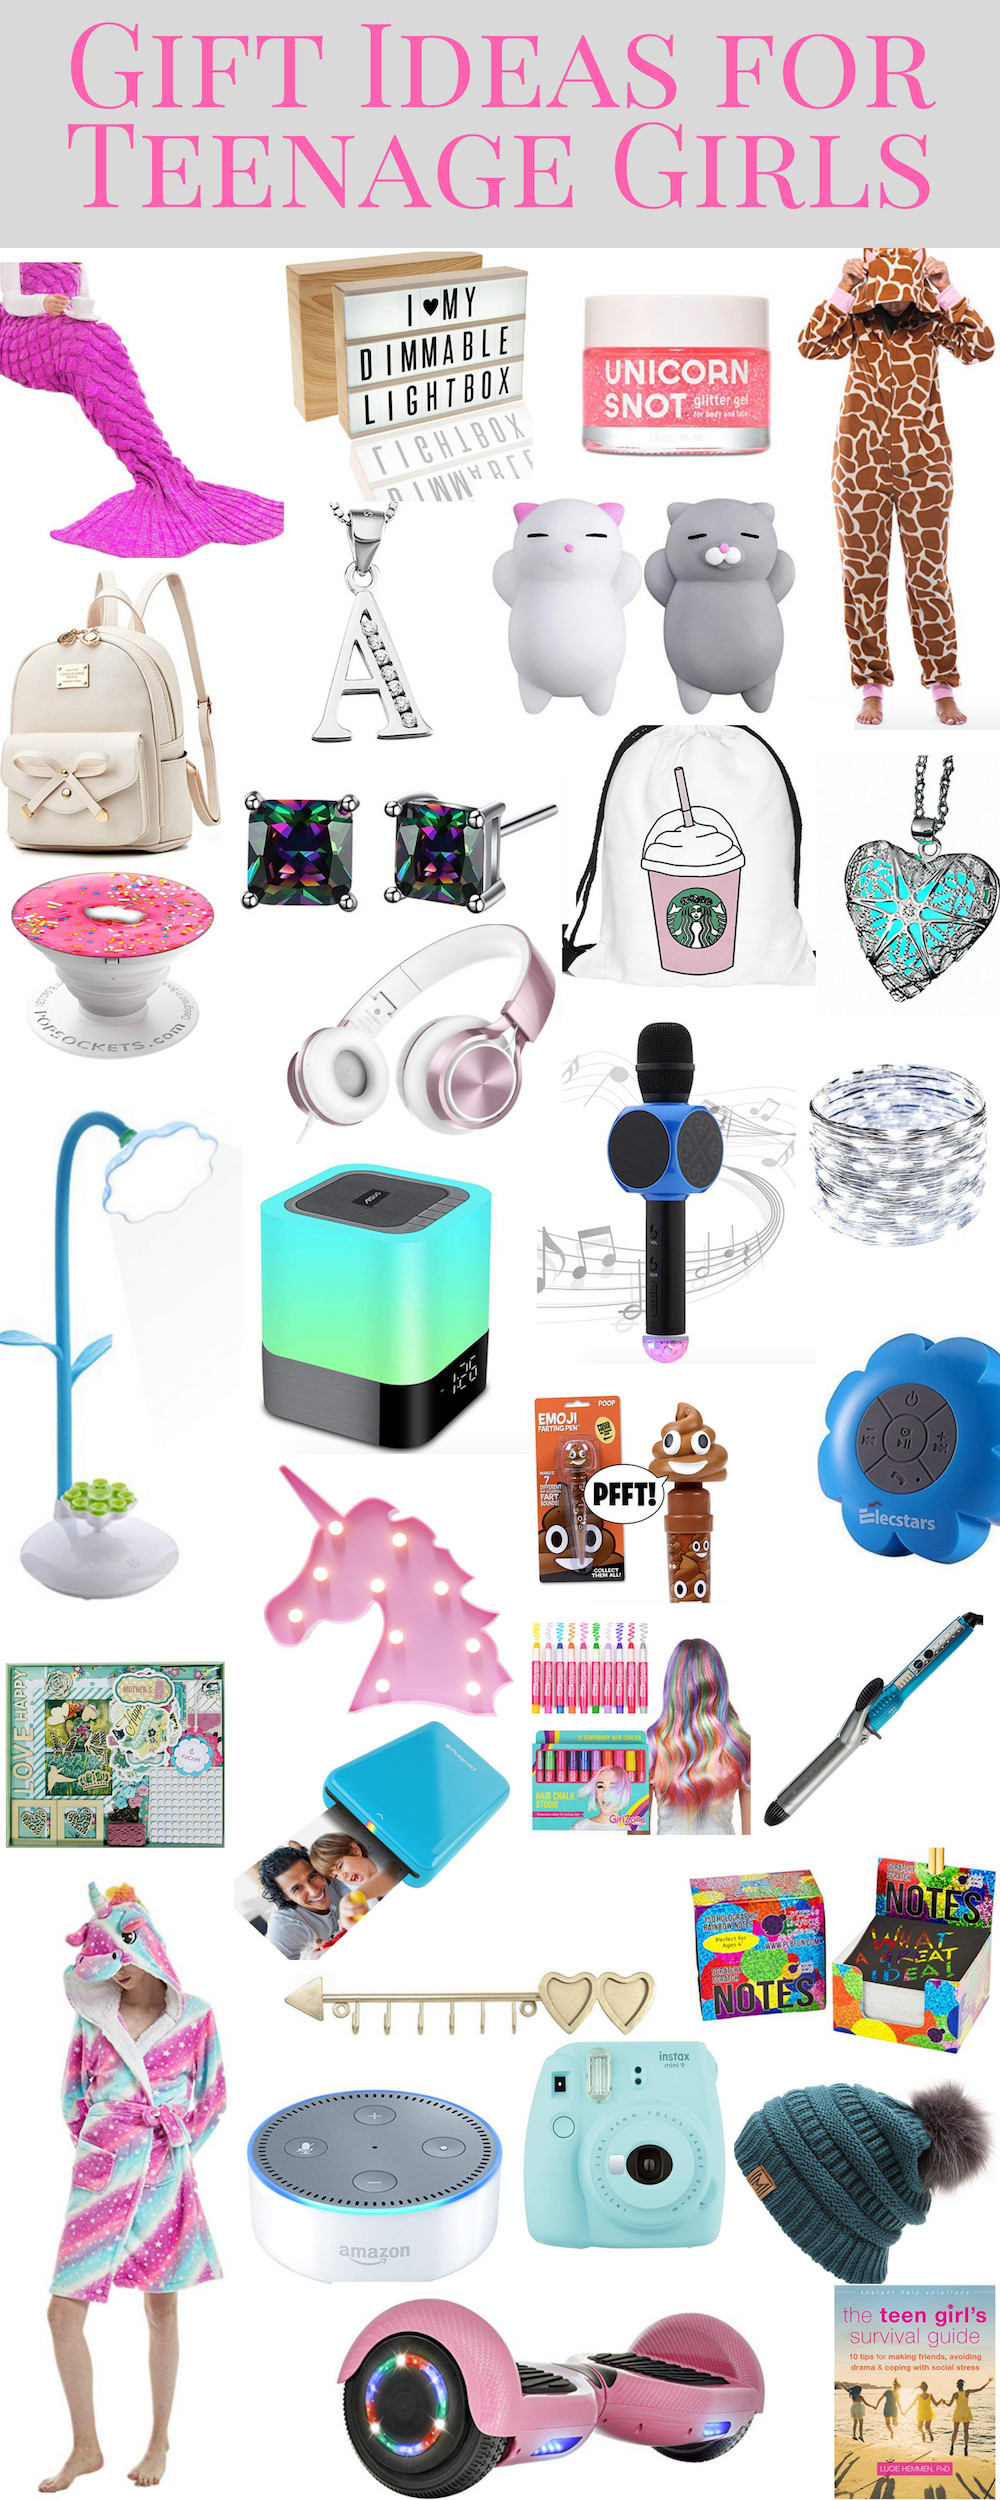 Teenage Gift Ideas For Girls
 Gift Ideas for Tween and Teen Girls — Our Kind of Crazy